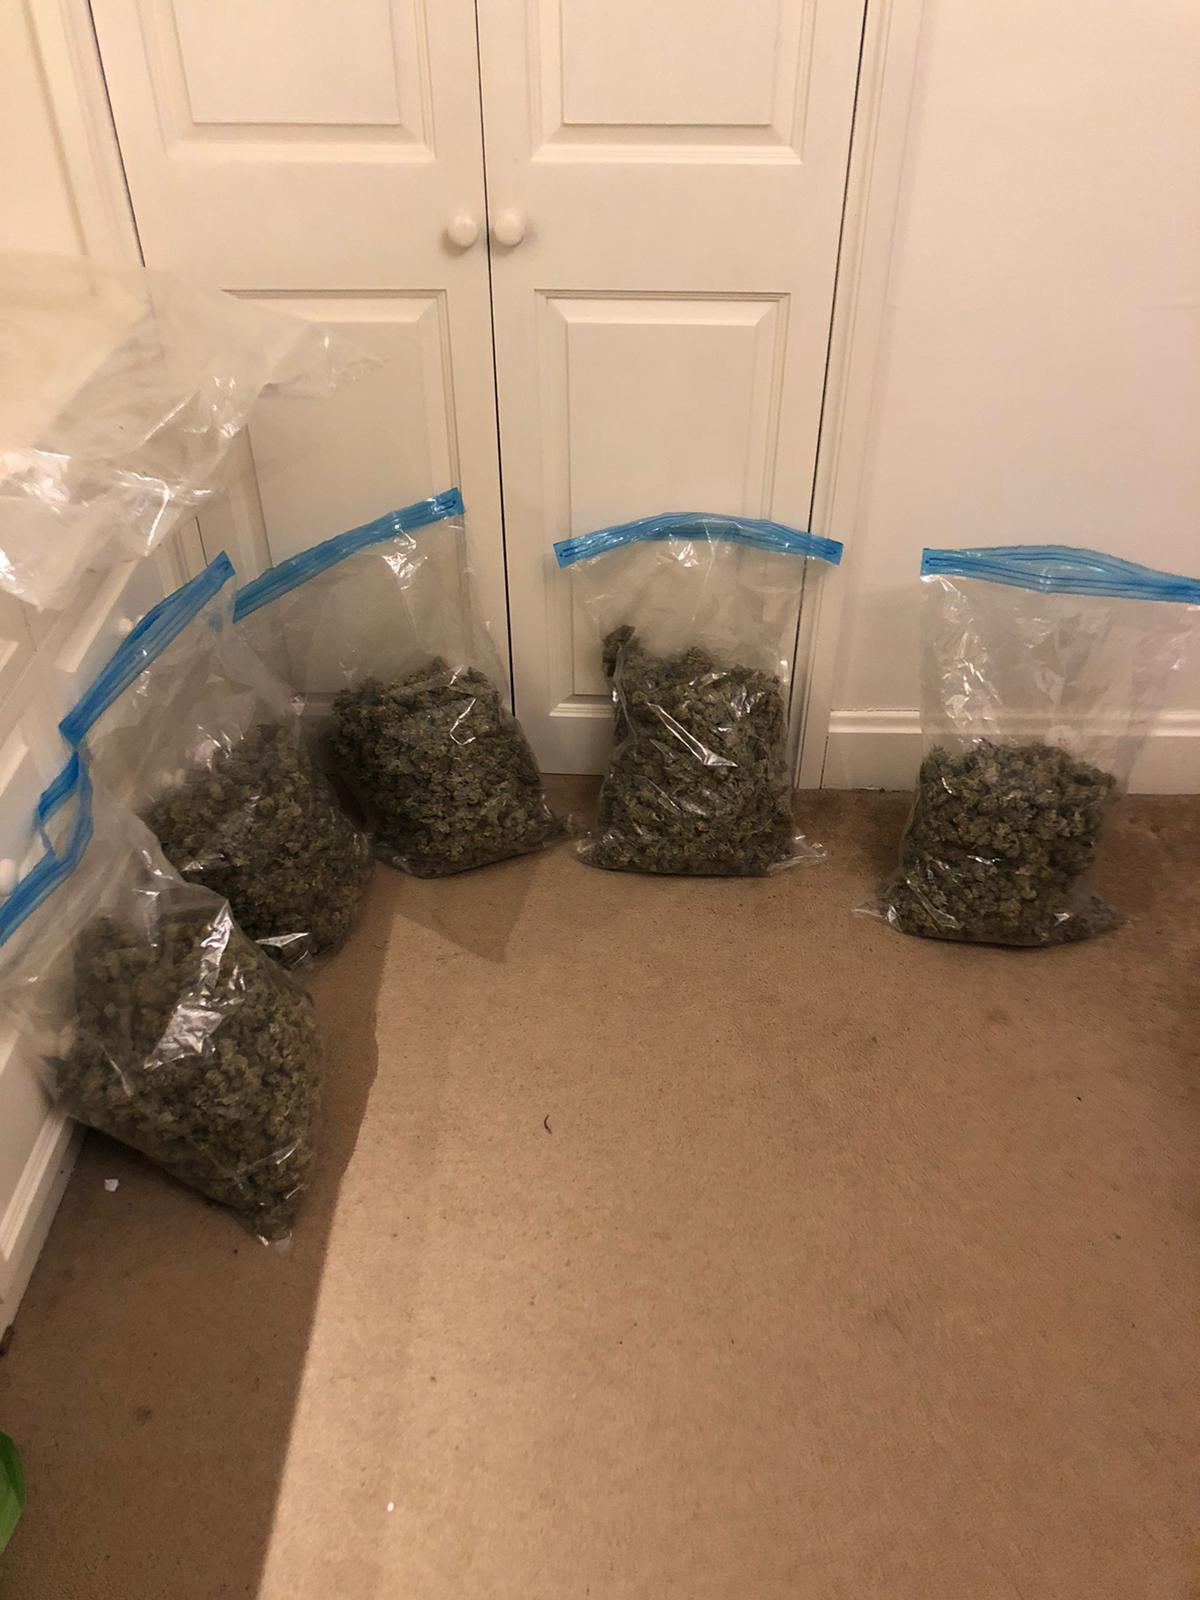 Met Police: UK-wide operation sees 16 arrests and 20kgs of drugs seized.